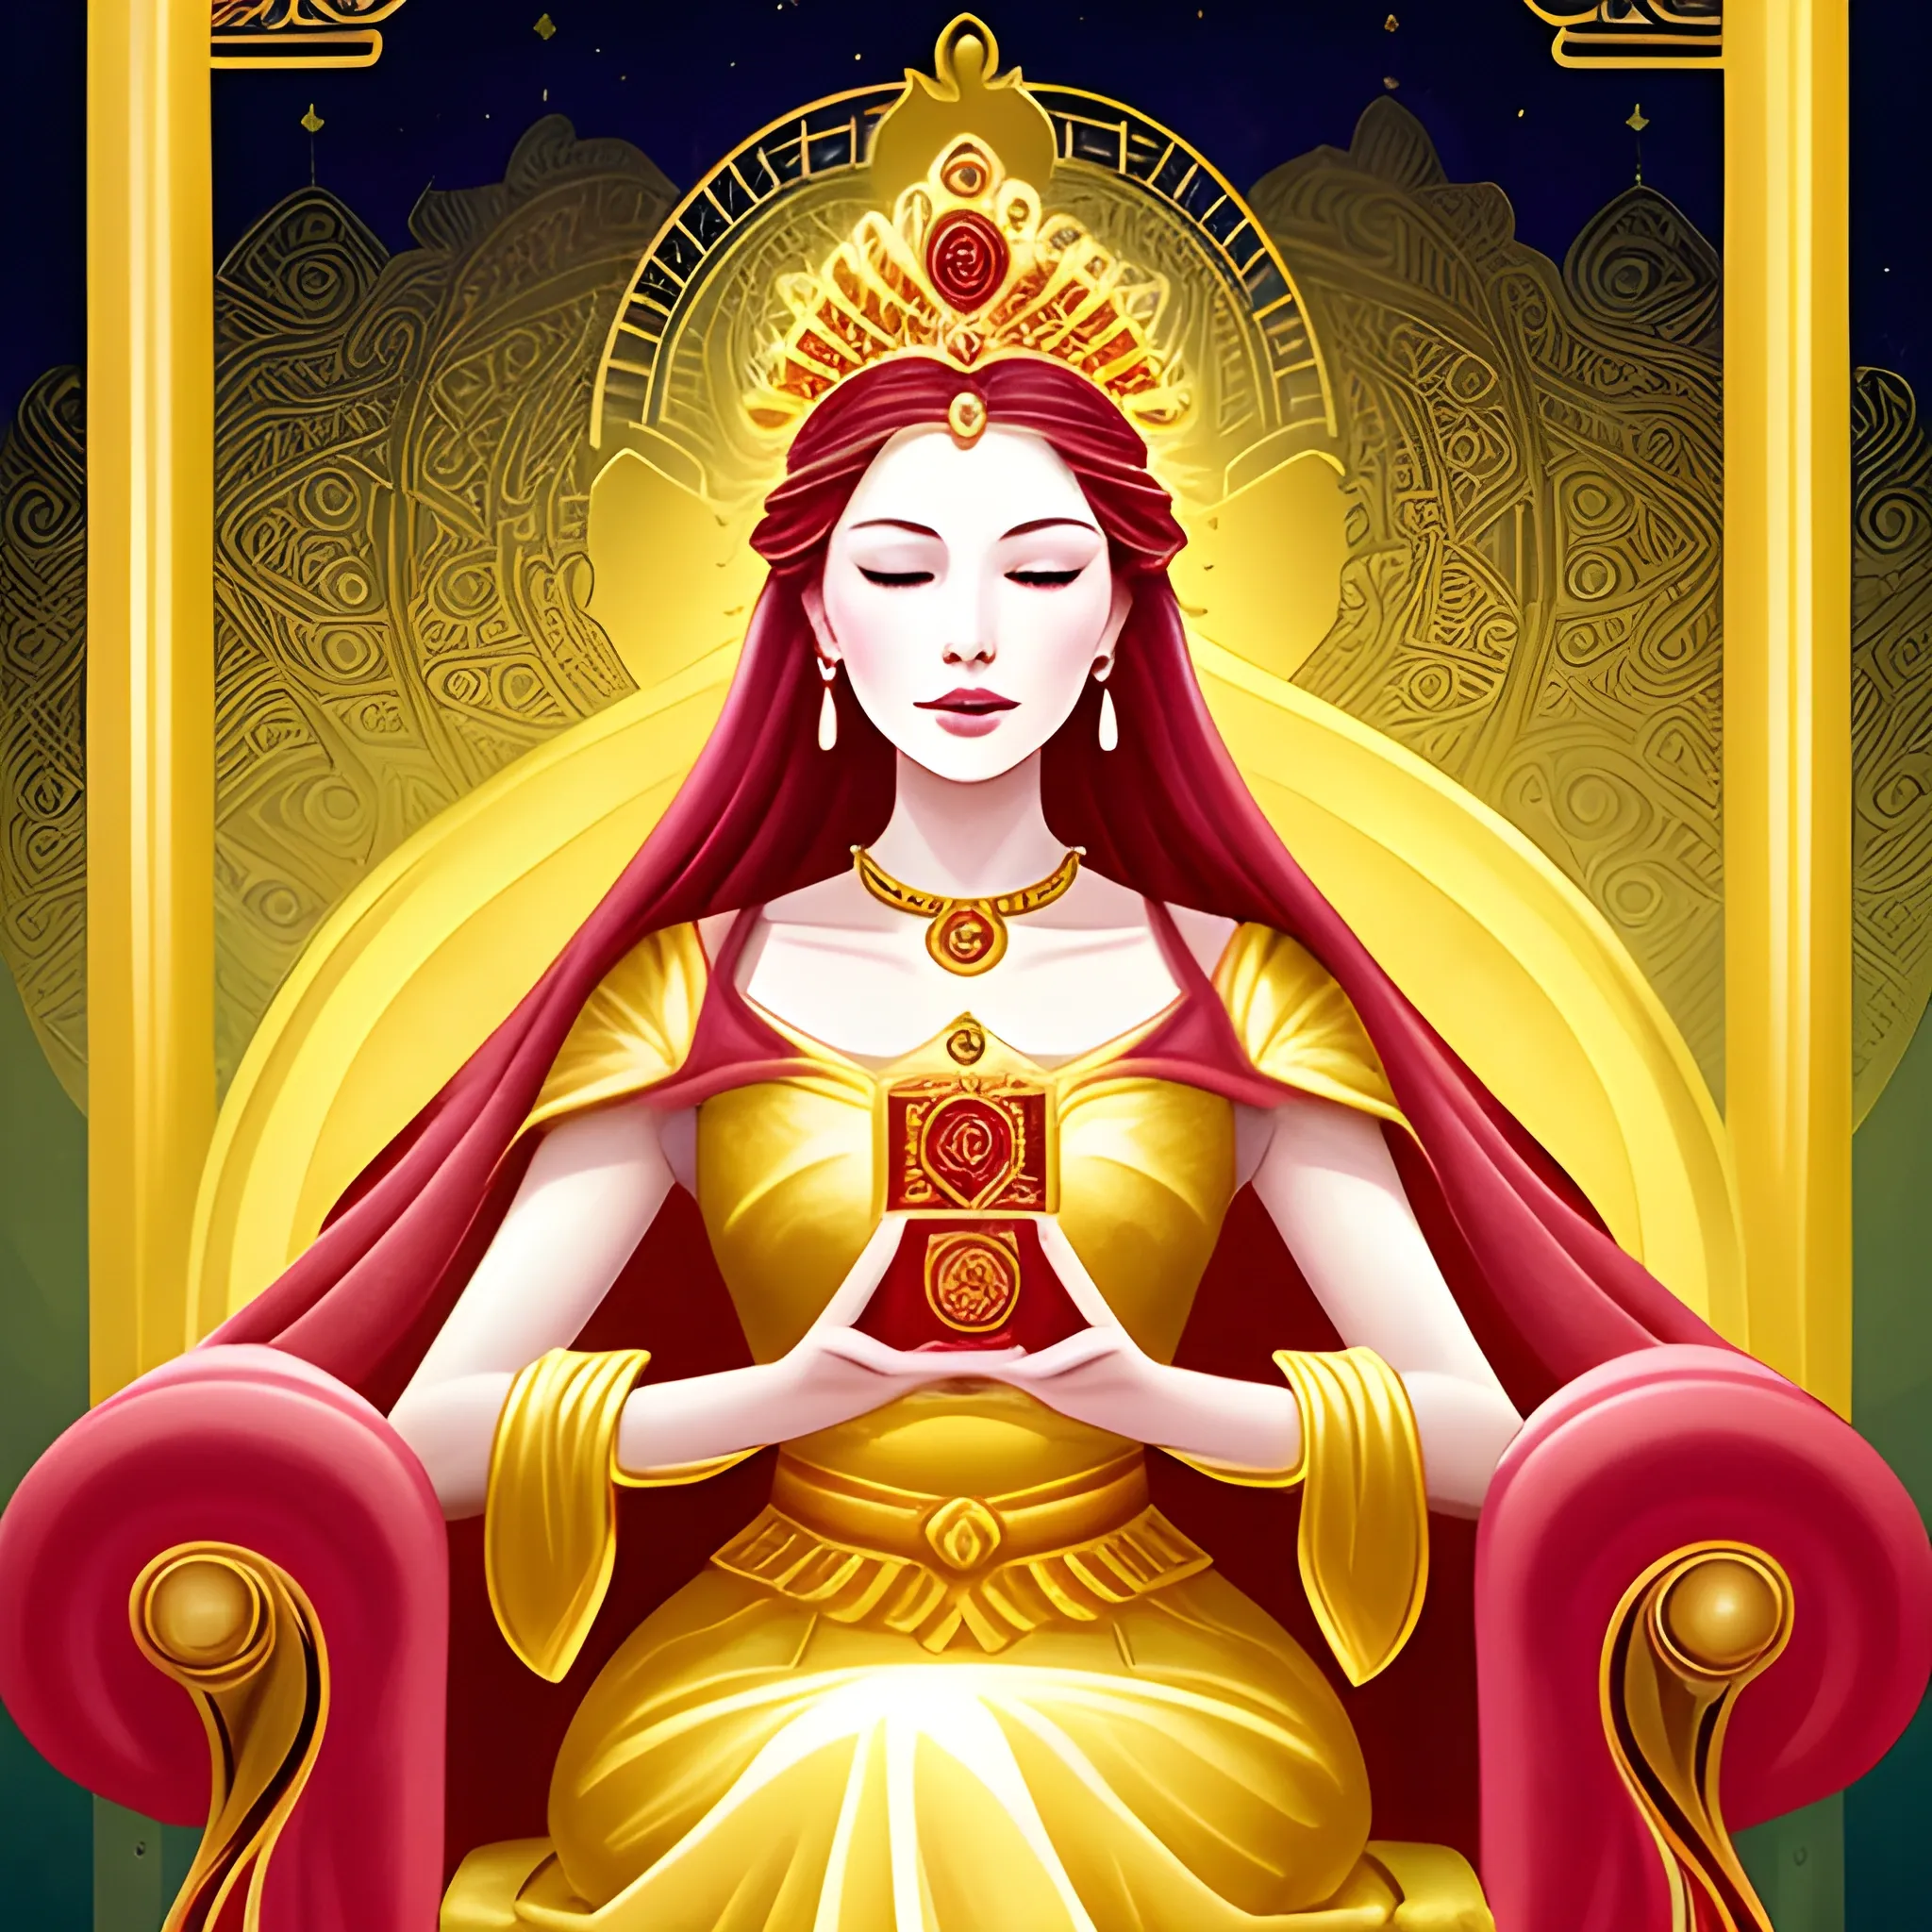 Please create an illustration depicting an elegant and serene woman seated on a golden throne. She radiates a sense of power and wisdom. The color red should be the base for her attire and the throne, but there should be golden tones that add a special glow. In her hands, she holds a magical oracle that reveals visions of good fortune. The oracle glows with vibrant and warm colors, and the visions it shows should be symbols of prosperity and success in the woman's life. The watercolor technique should give the illustration a soft and ethereal look that enhances the sense of mystery and magic